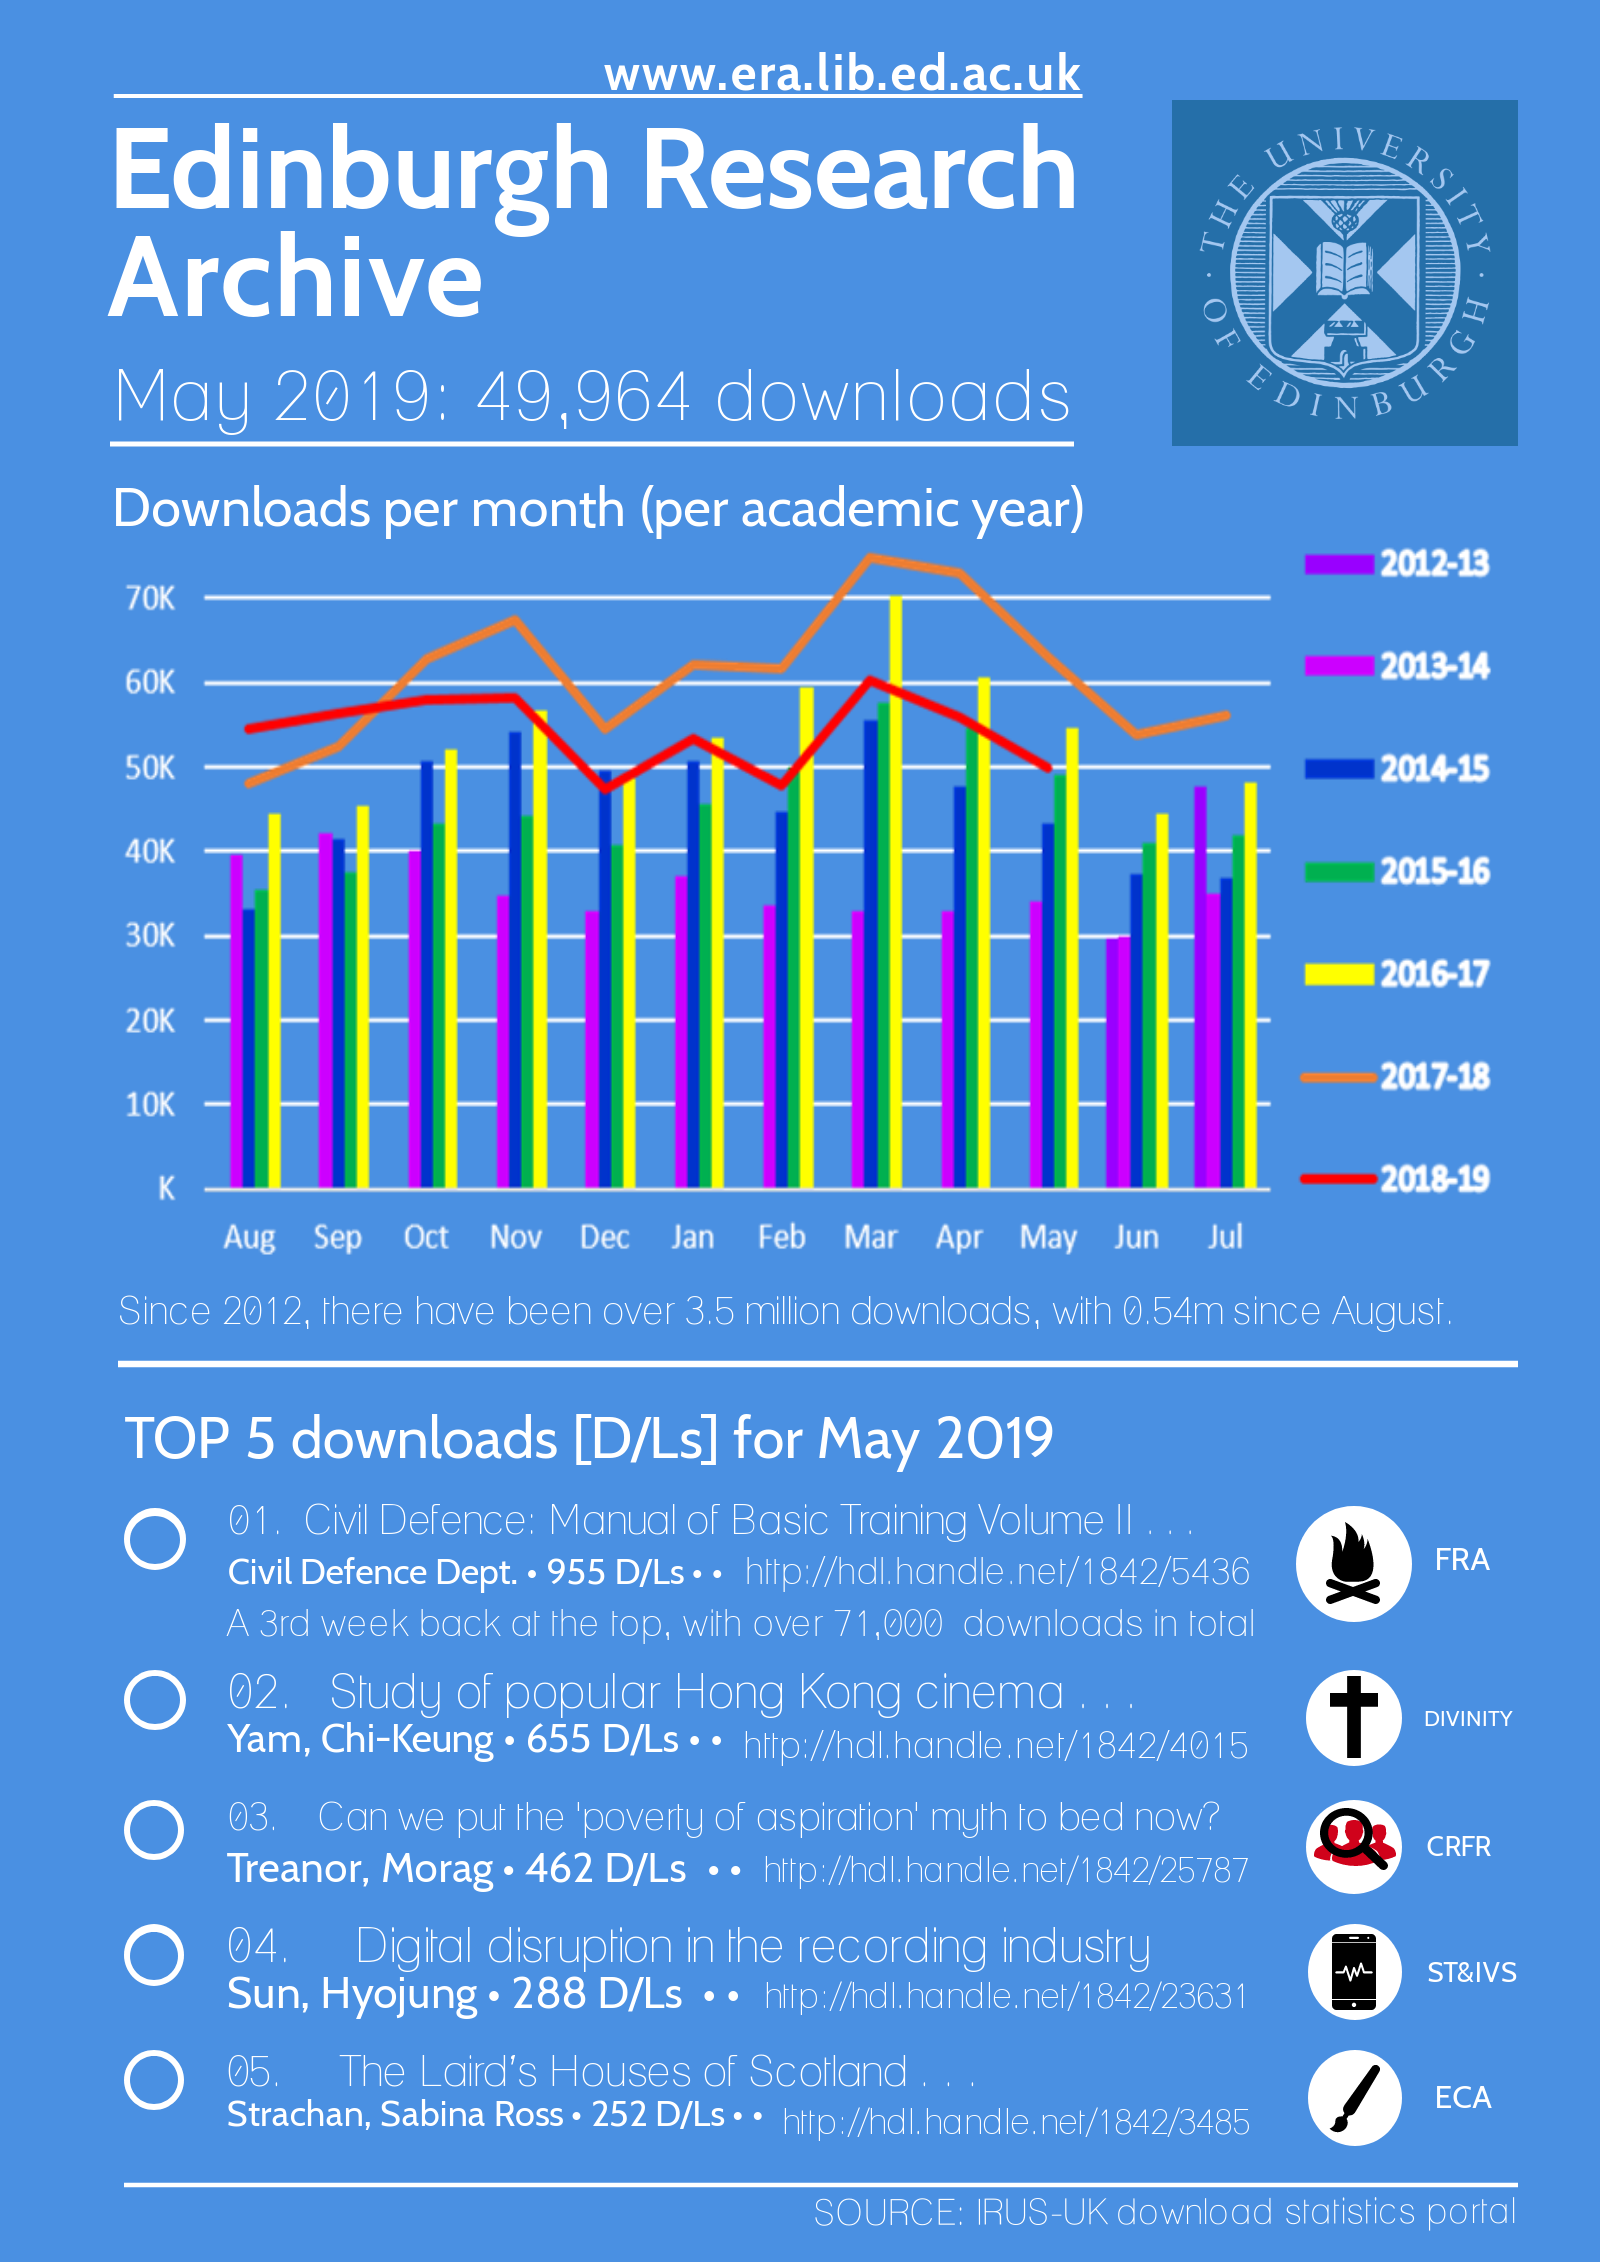 Edinburgh Research Archive: May 2019 downloads infographic - Chart: Downloads per month (per academic year) 2012-2019